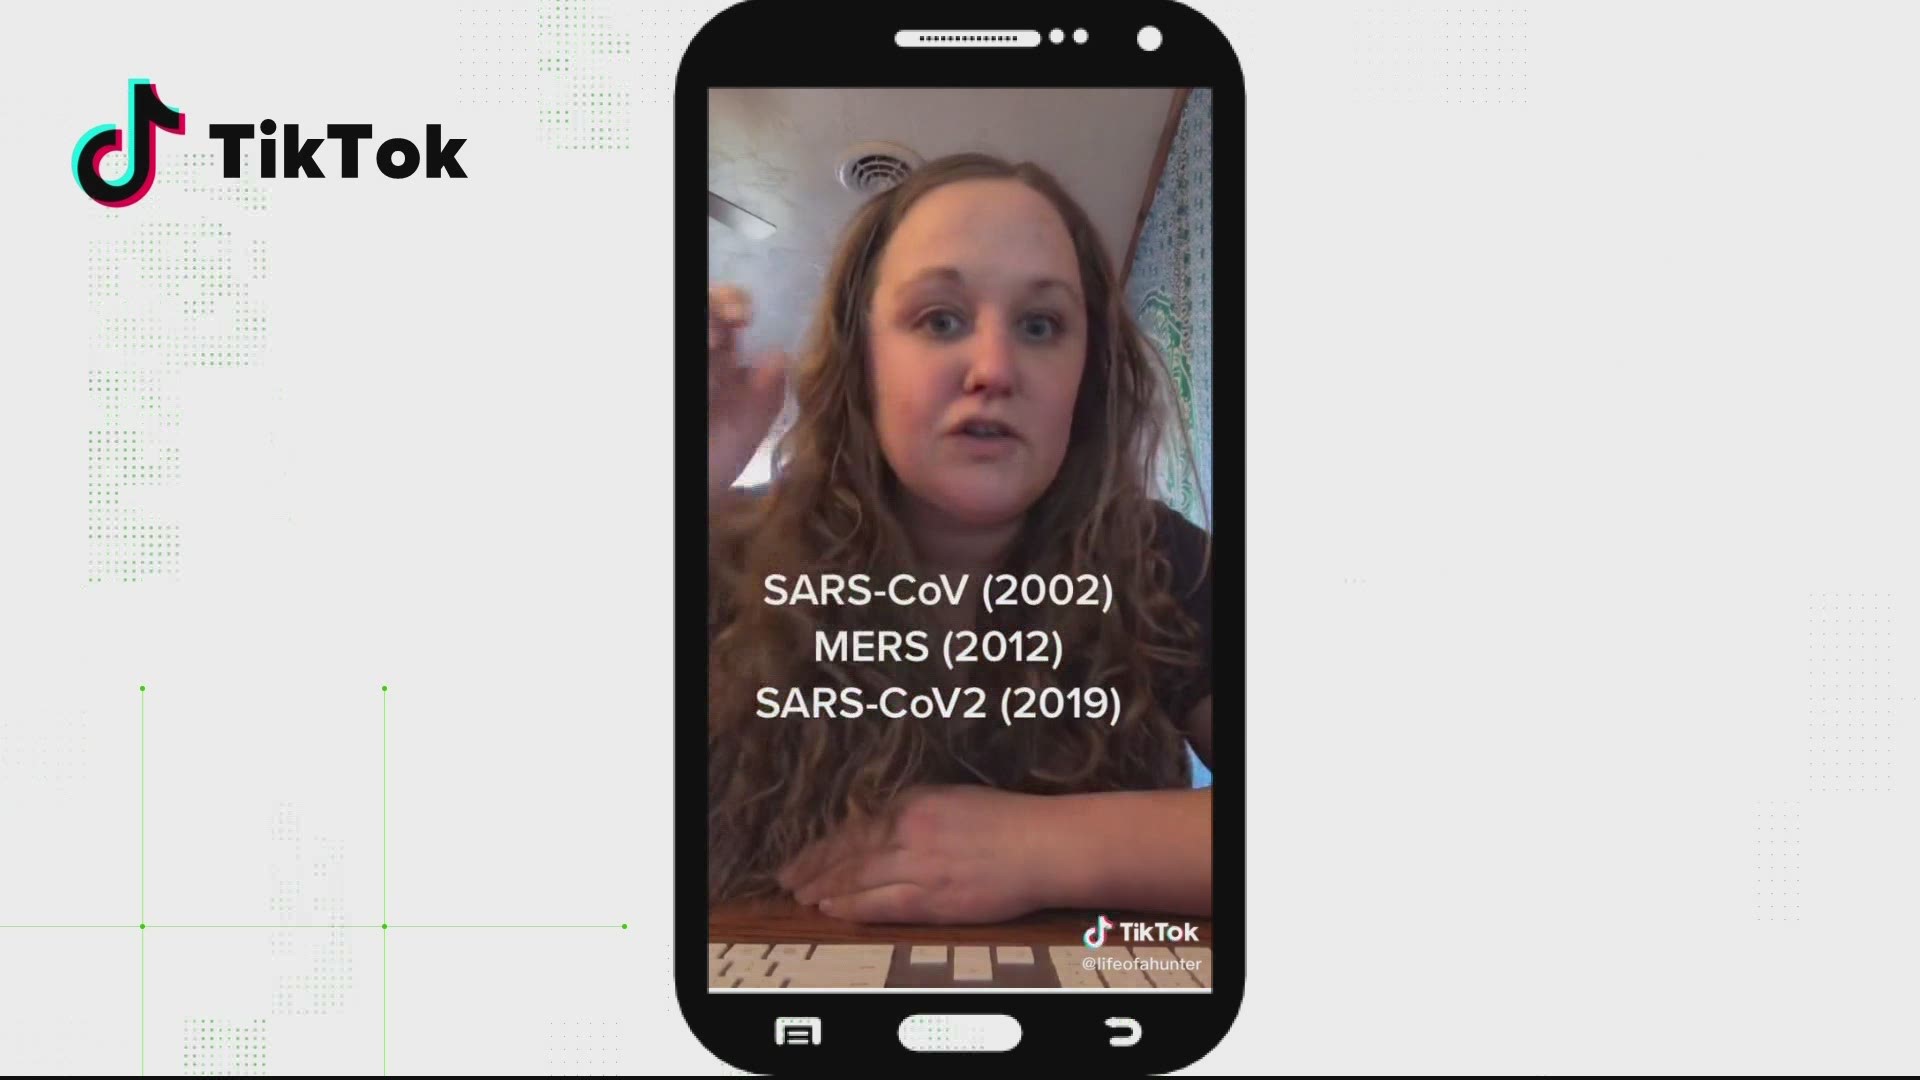 A viral TikTok video claims the COVID-19 vaccines aren't new. But, our experts say that is oversimplifying the SARS and MERS vaccines played in vaccine development.